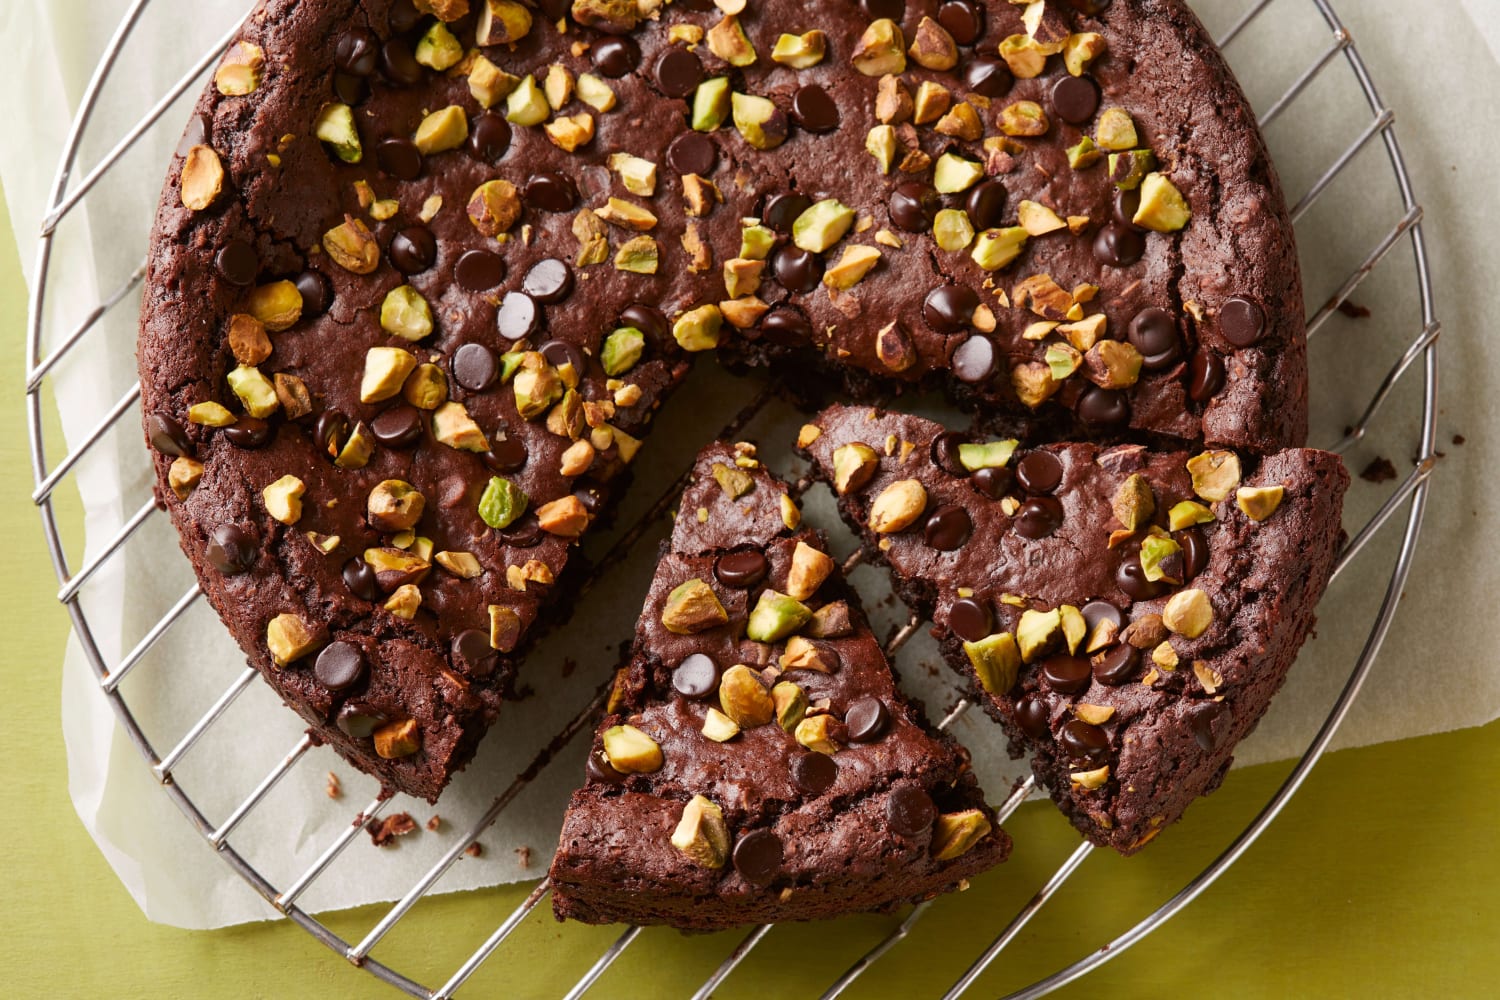 I made this brownies last night and they were really good! Link attached. From Forks Over Knives.